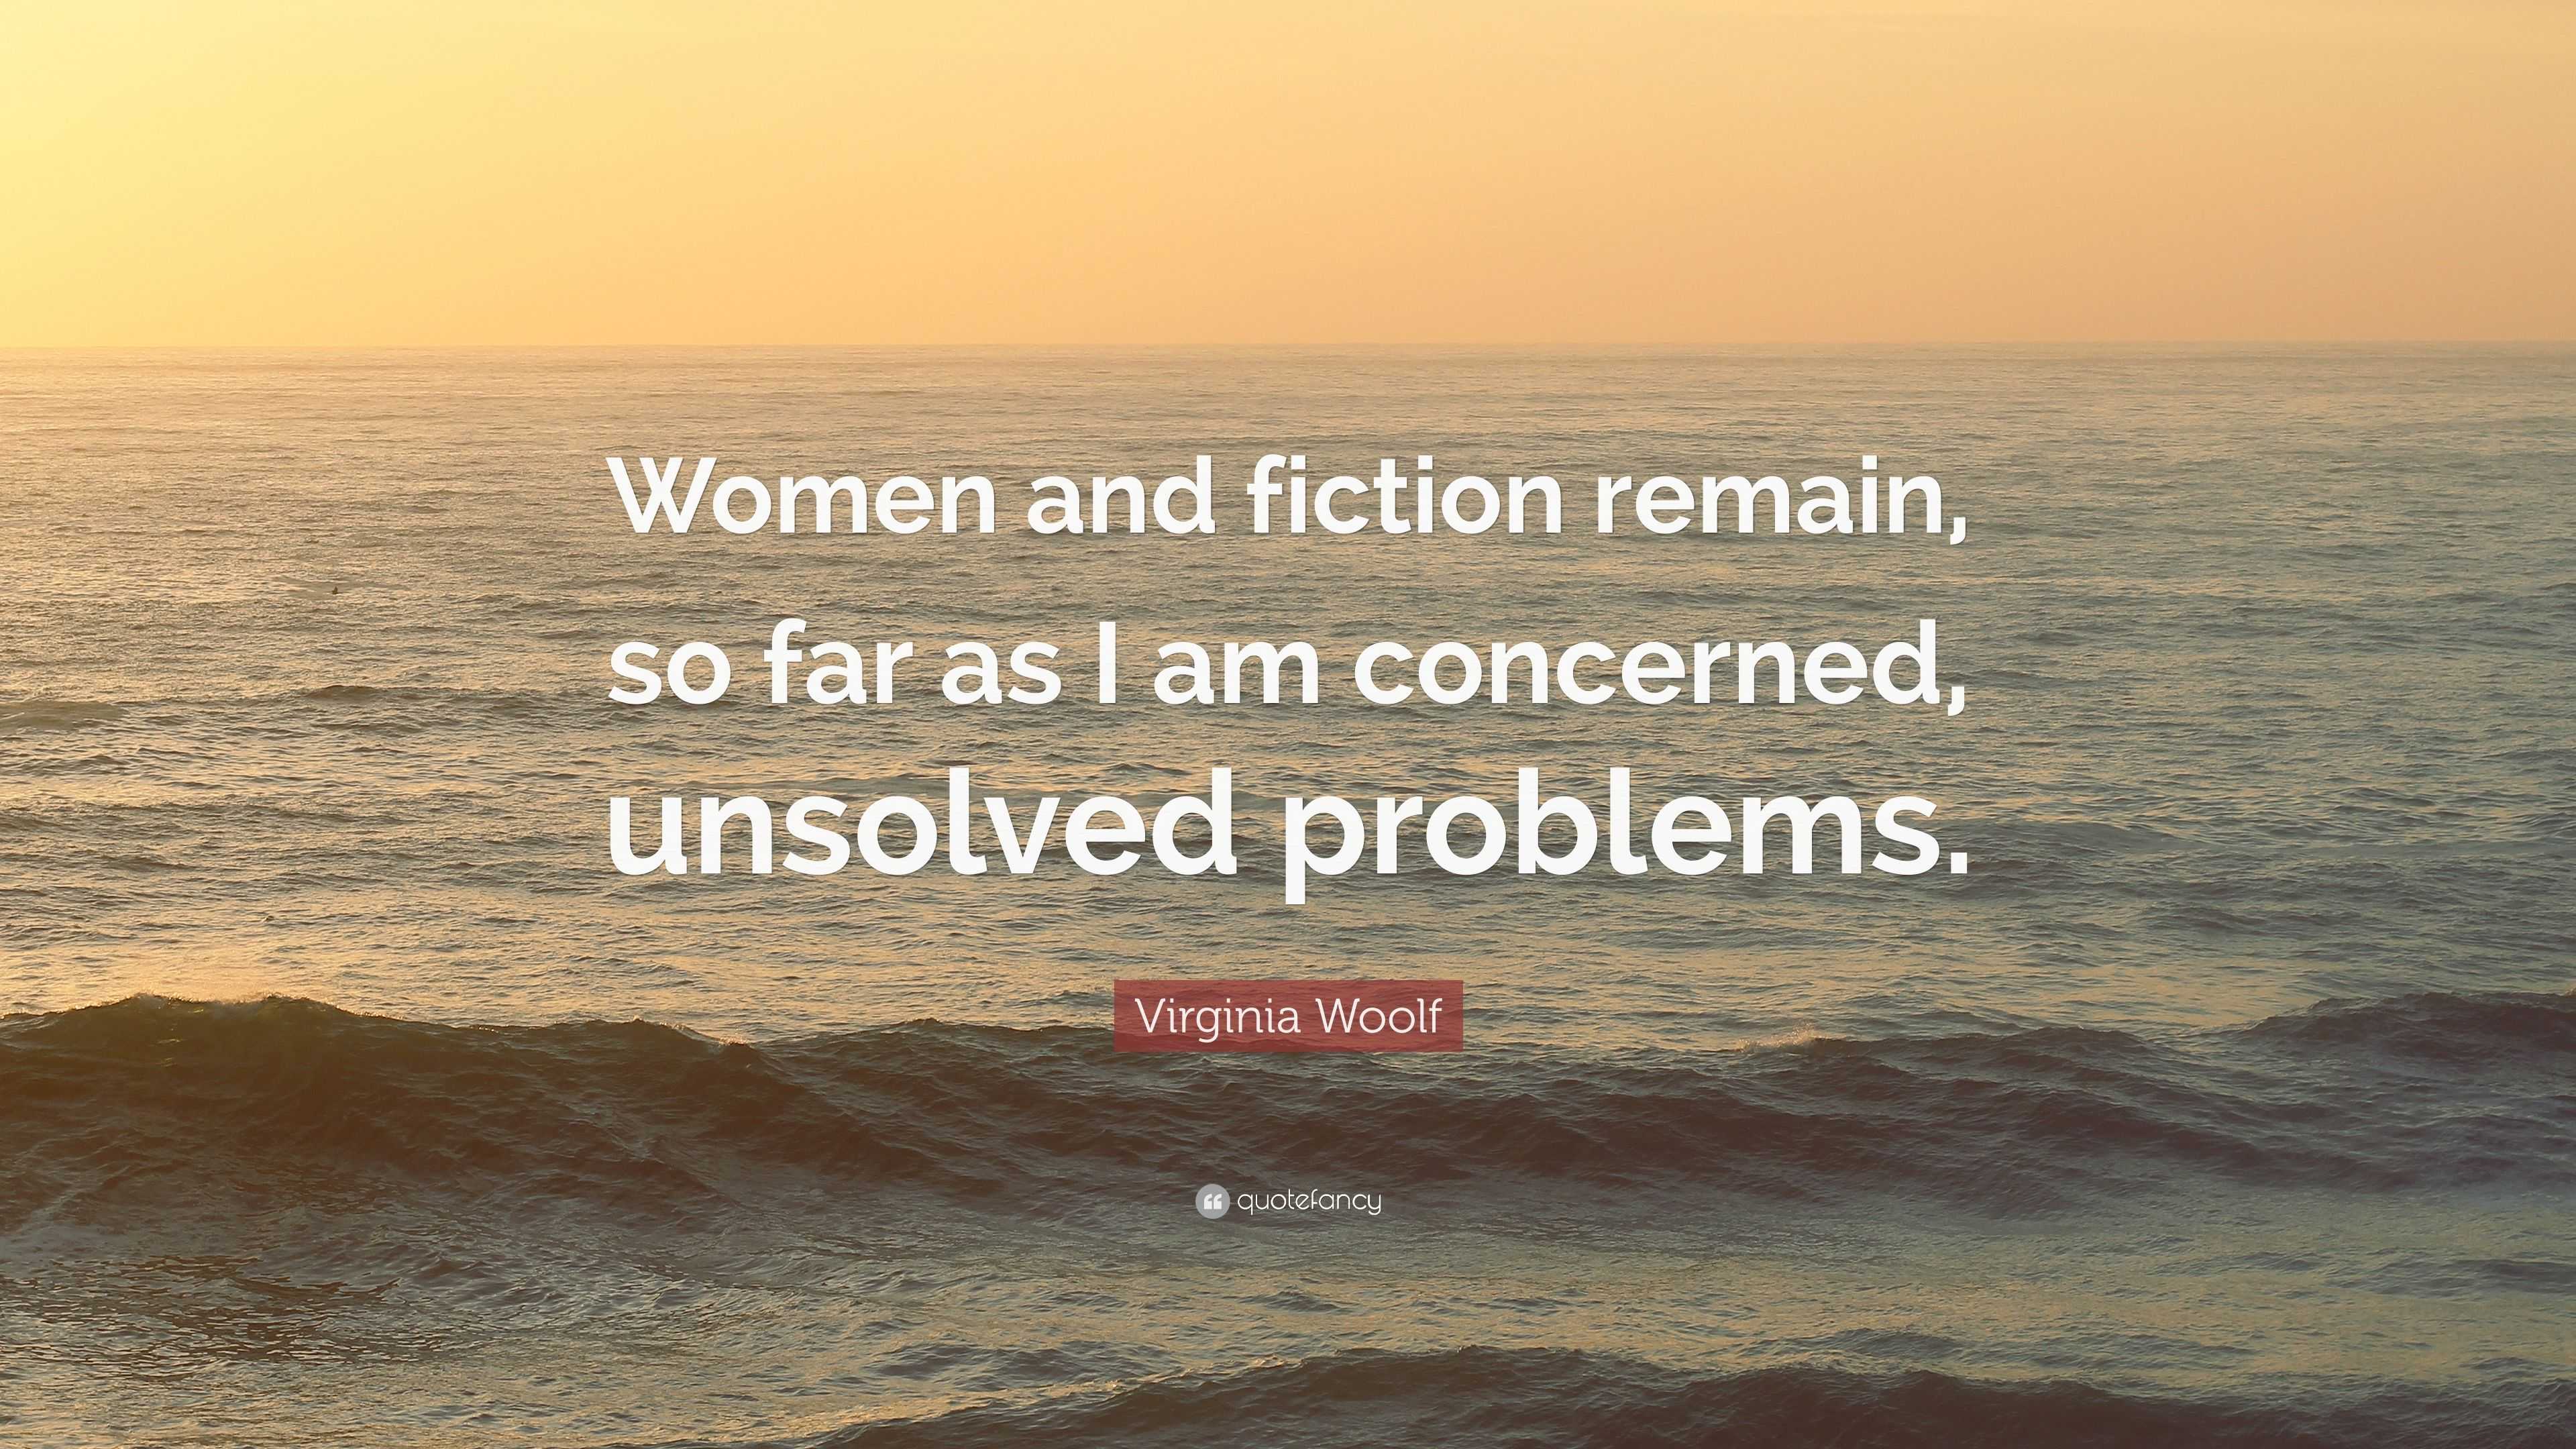 Virginia Woolf Quote: “Women and fiction remain, so far as I am ...